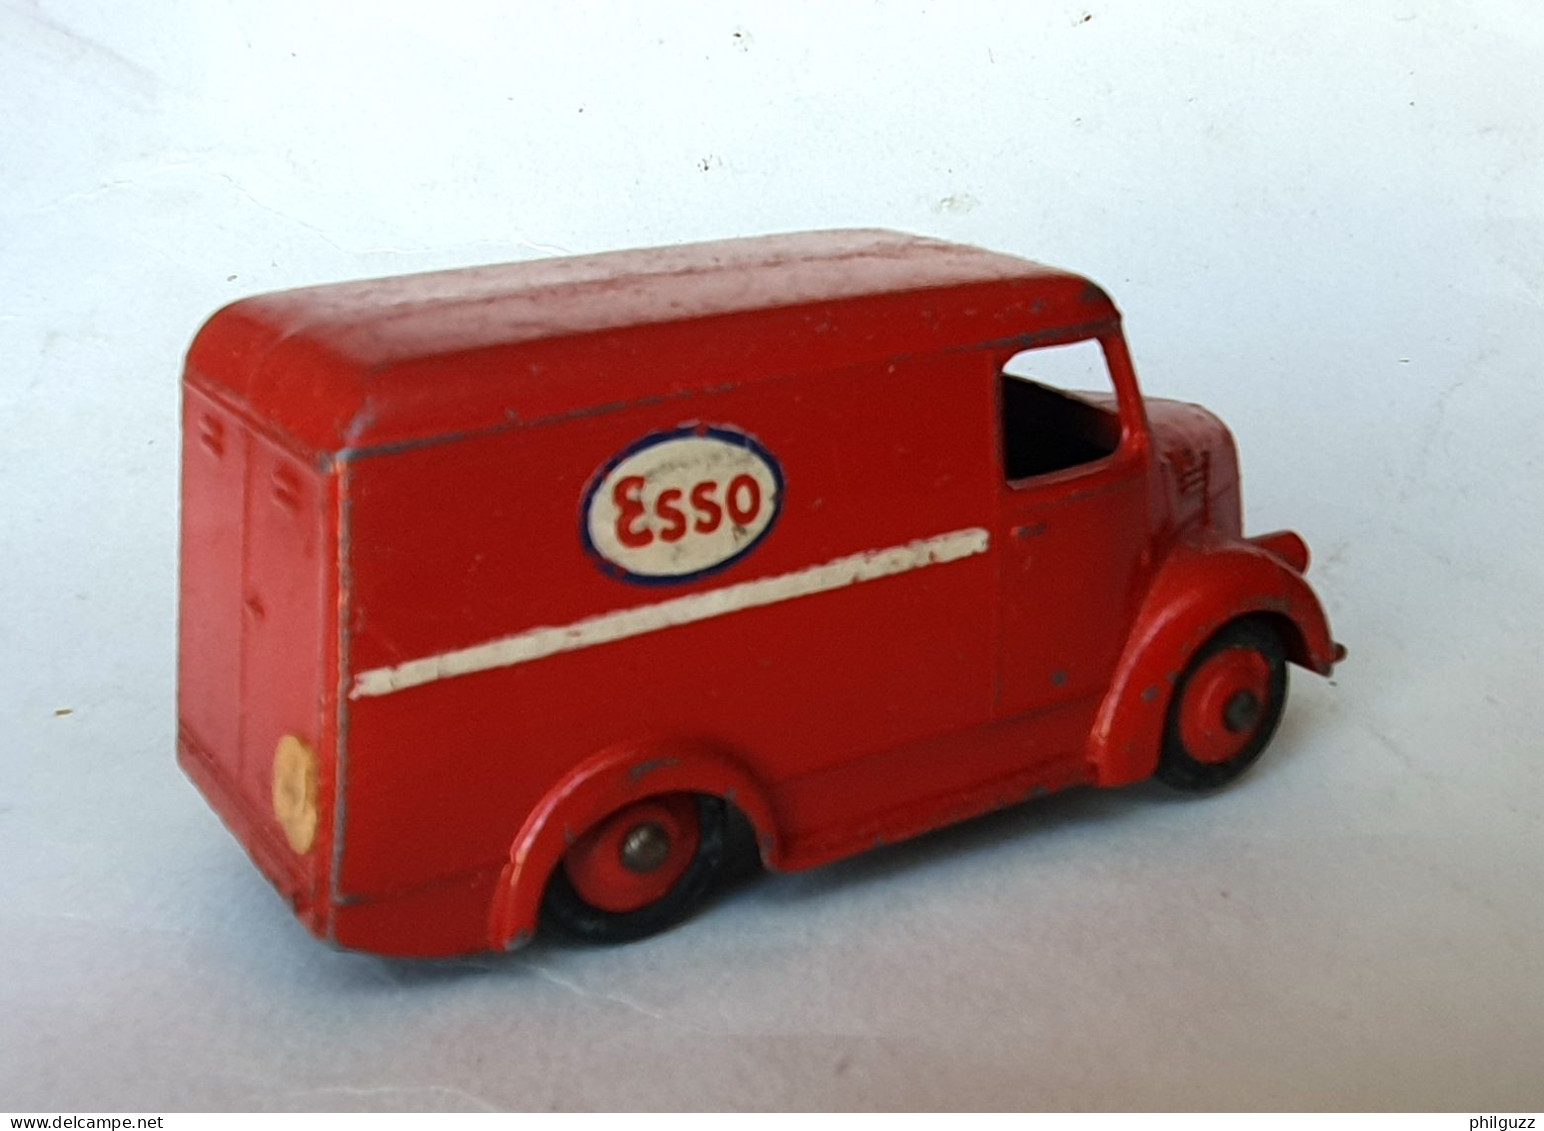 VOITURE - AUTOMOBILE - VAN TOJAN ESSO Made In England MECCANO Rouge 1/43 è - Dinky